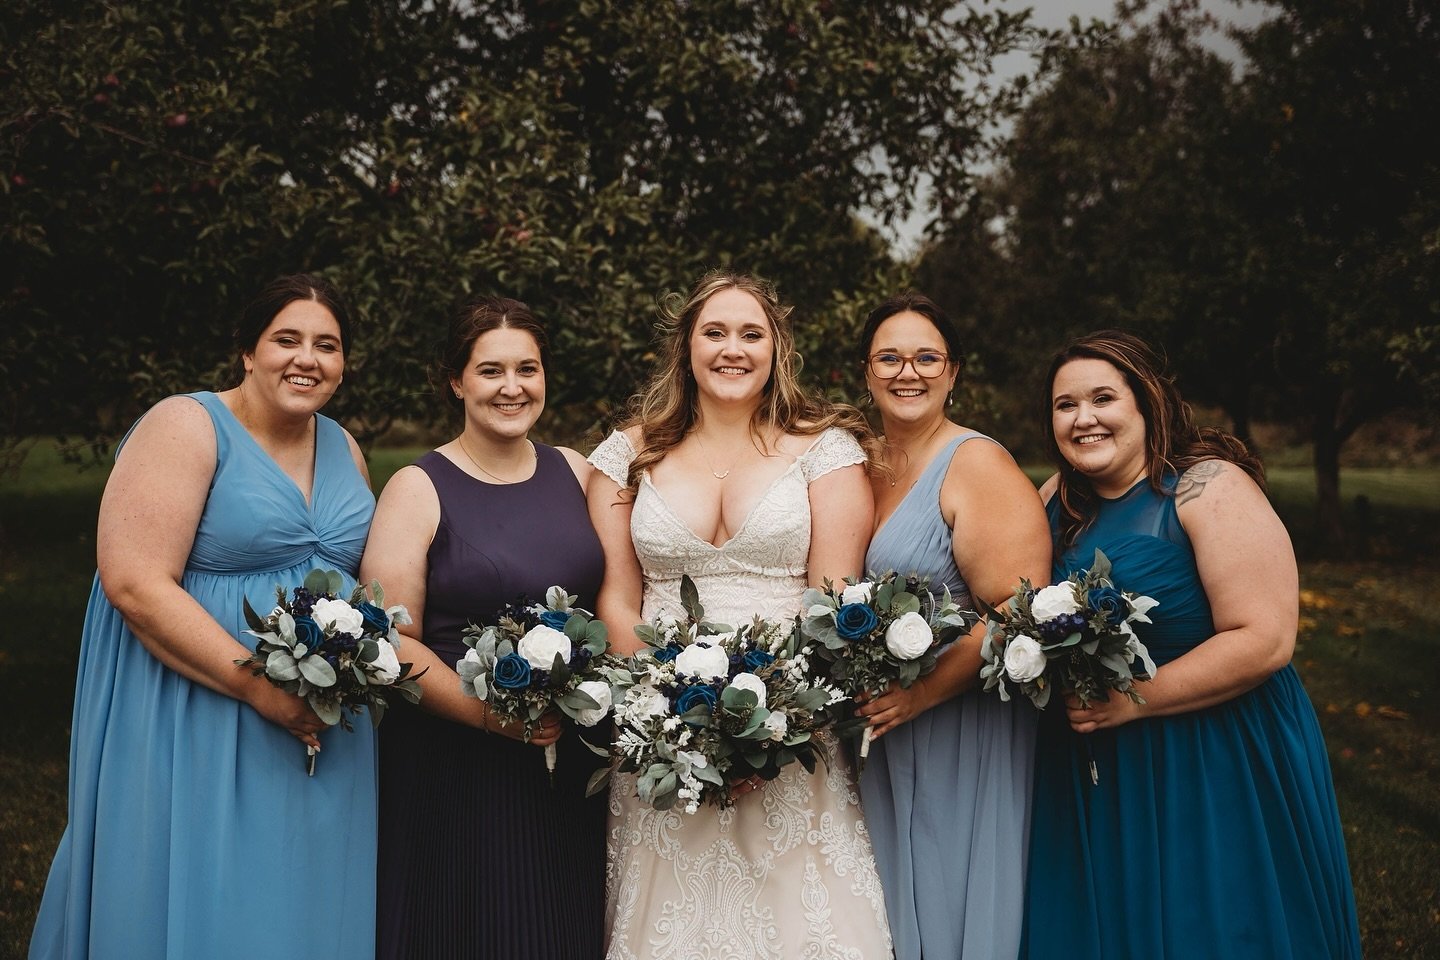 I absolutely love the multi-color bridesmaid dress trend, I think it looks so put together in your own unique way. How beautiful are these ladies!?
&bull;&bull;&bull;
📸: @mandmterryphotography